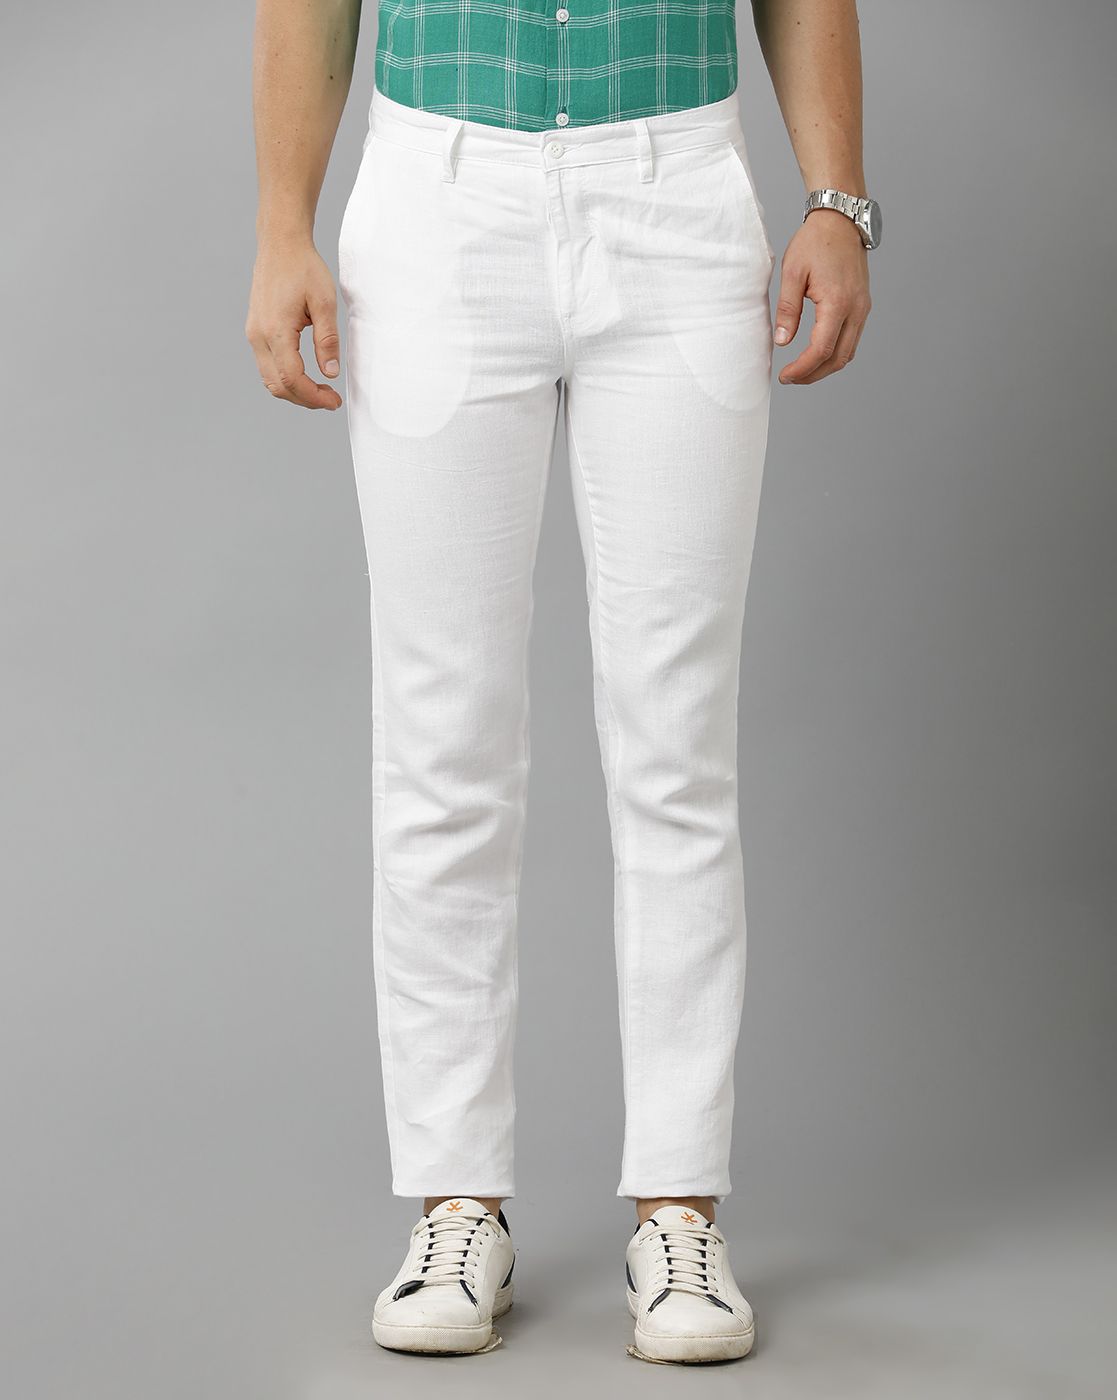 Olive Pants with White T-Shirt | Hockerty